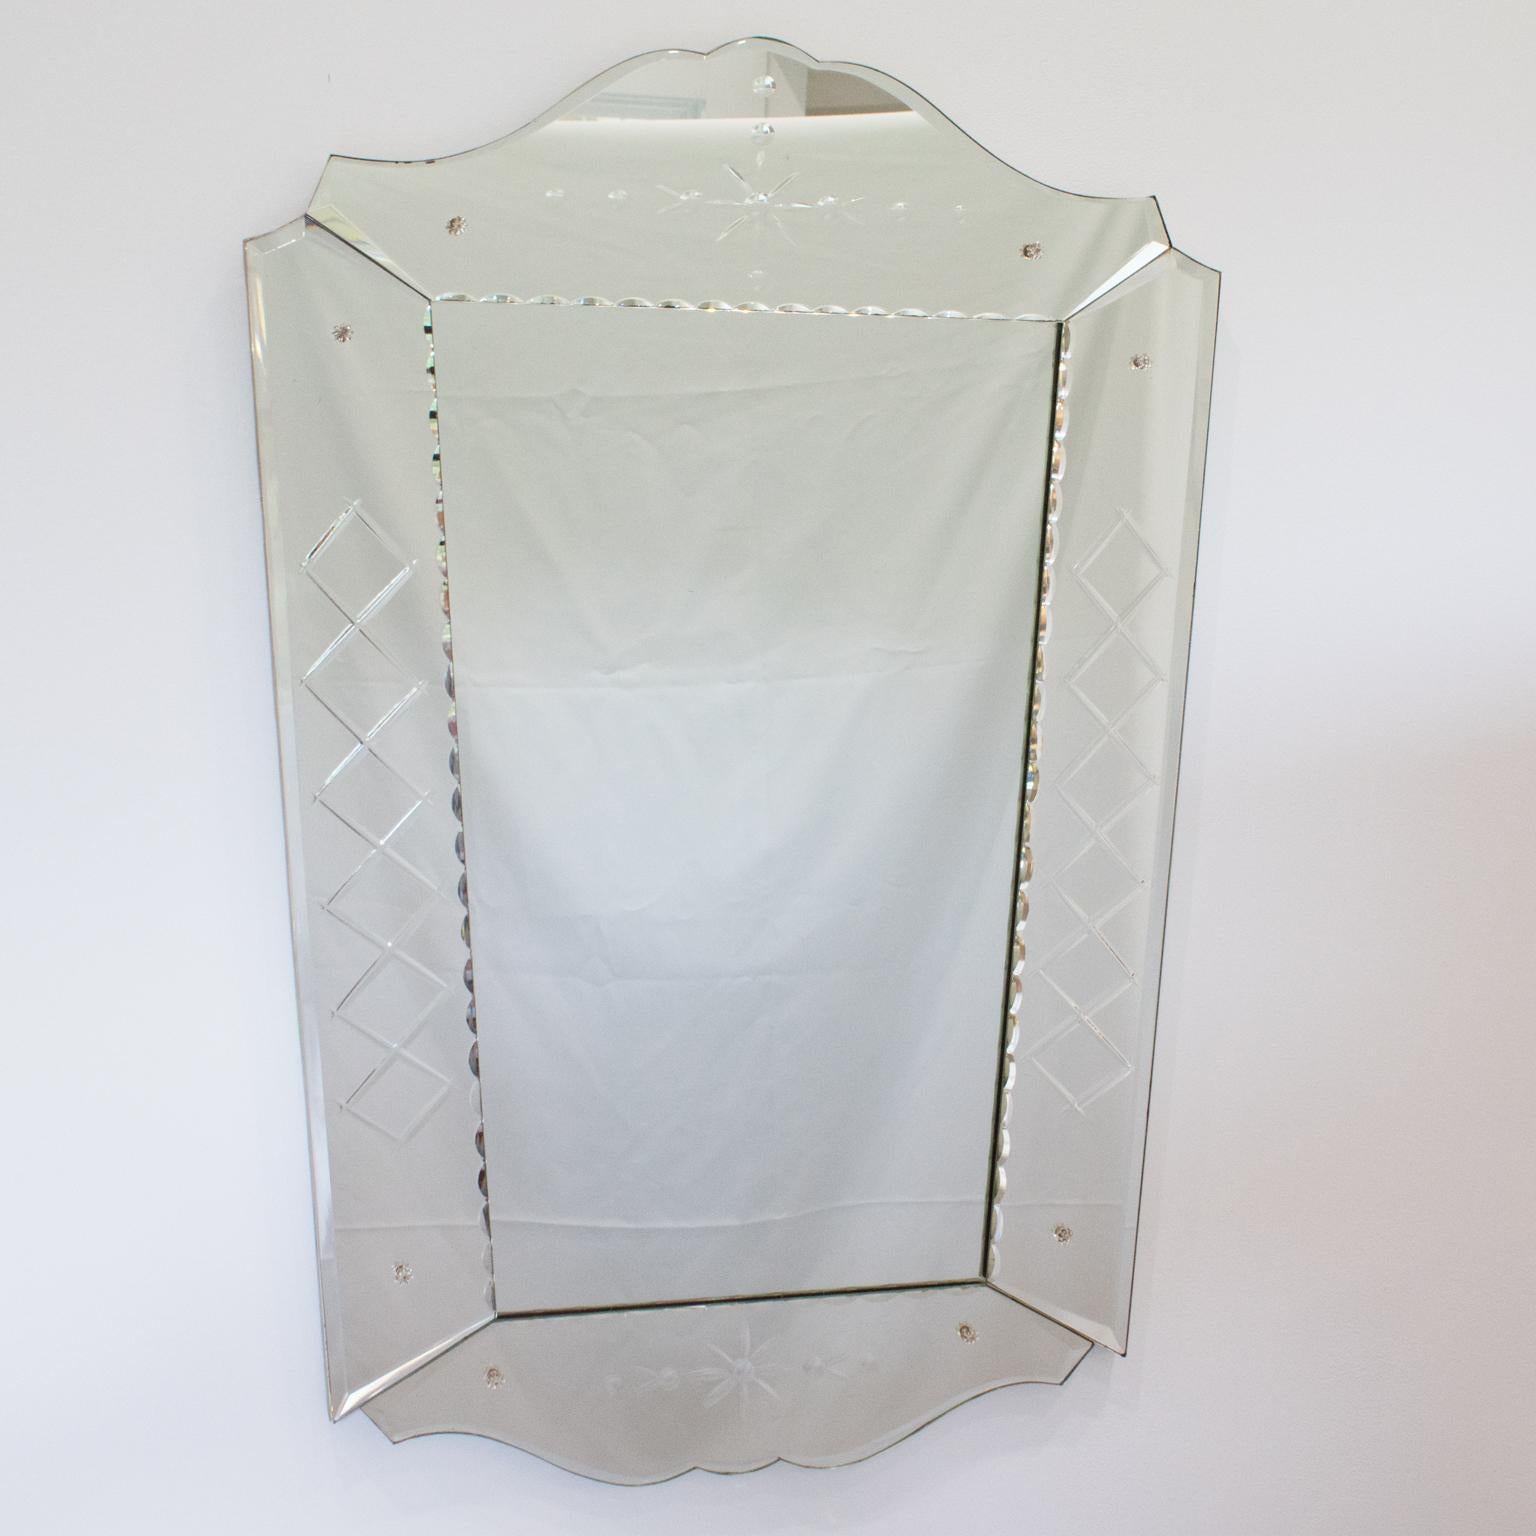 This elegant 1940s French wall mirror boasts a Venetian-style shape with beveled edges and a geometric etching design. The modernist flair and stylized design give versatility to this substantial mirror to fit in any room, from a boudoir to a